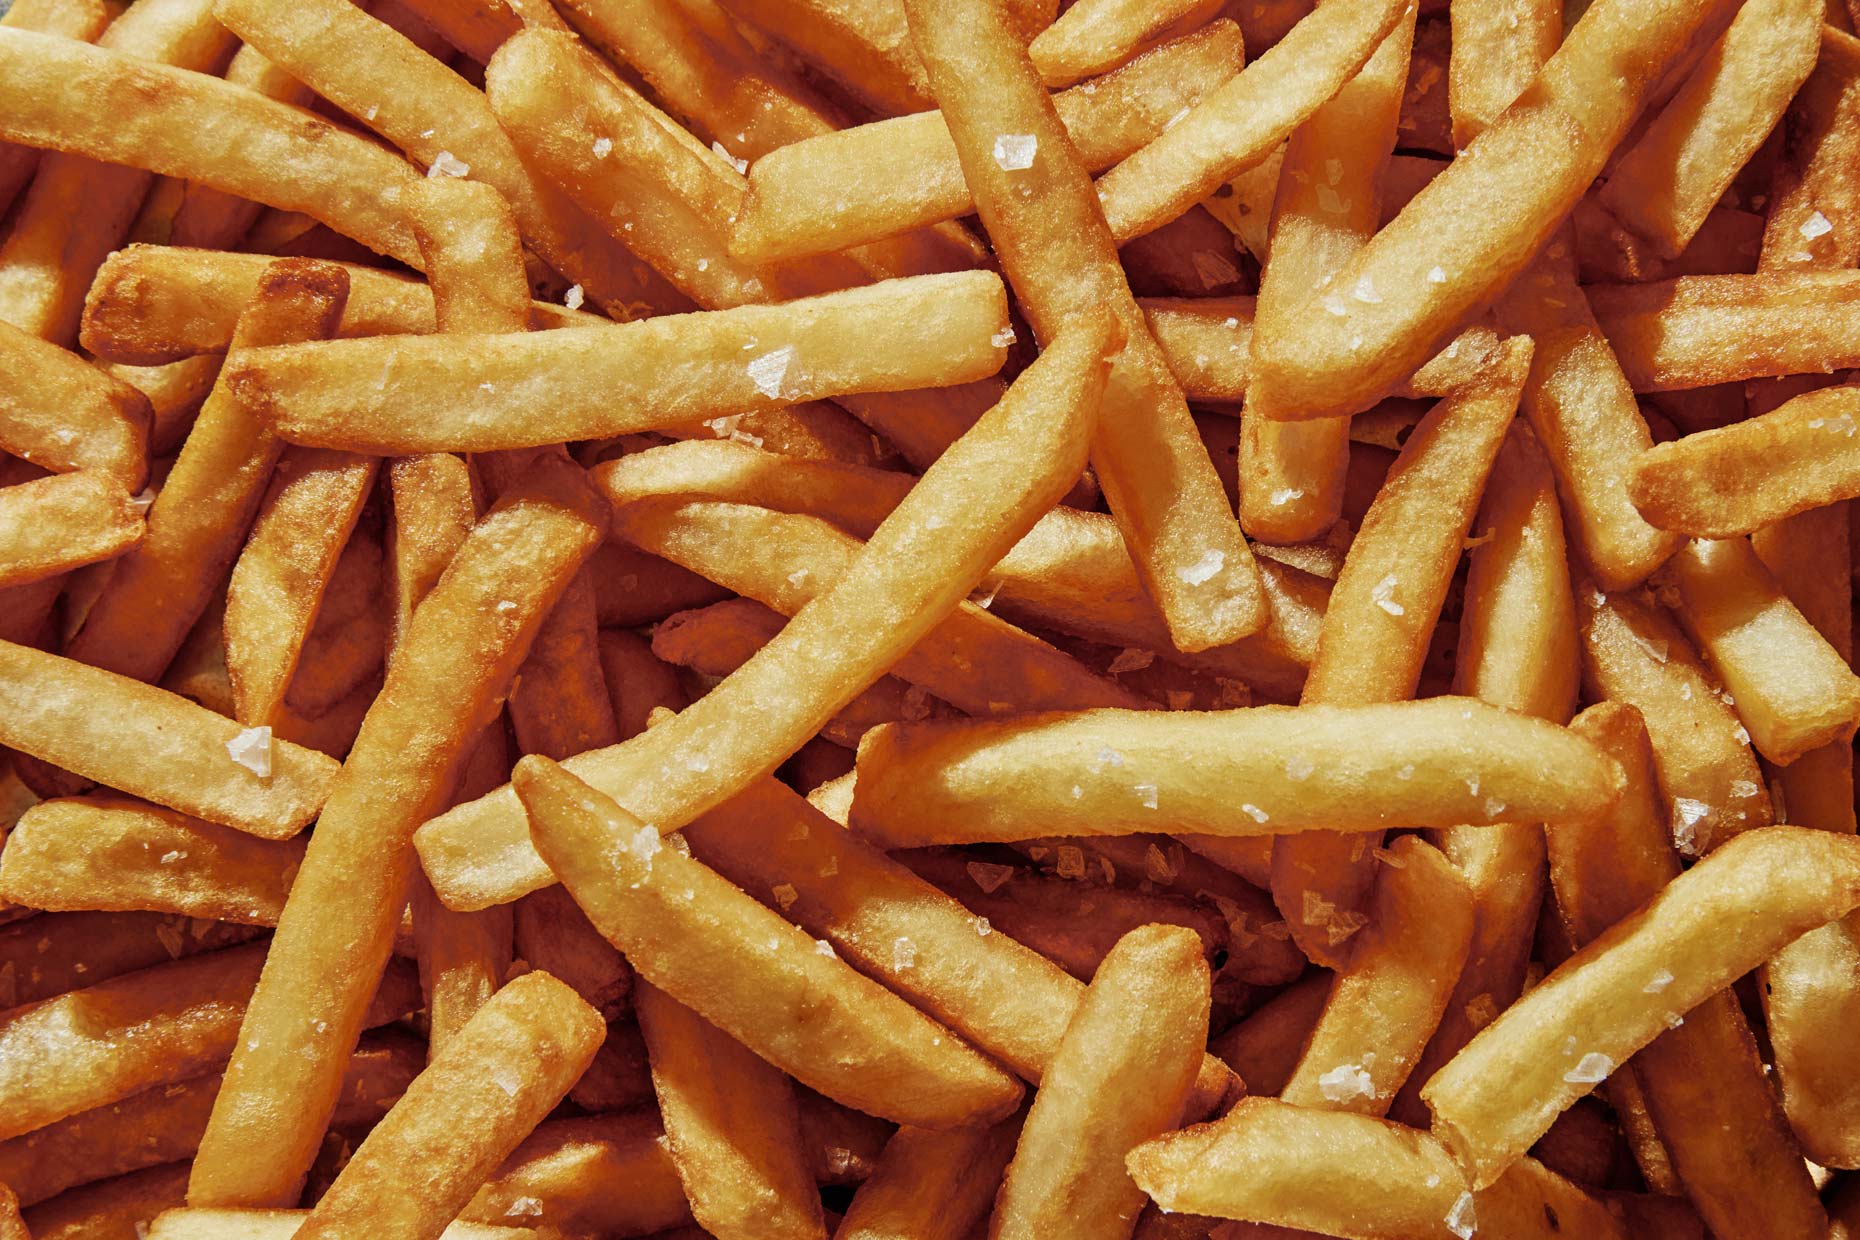 03_French_Fries_Detail_0022